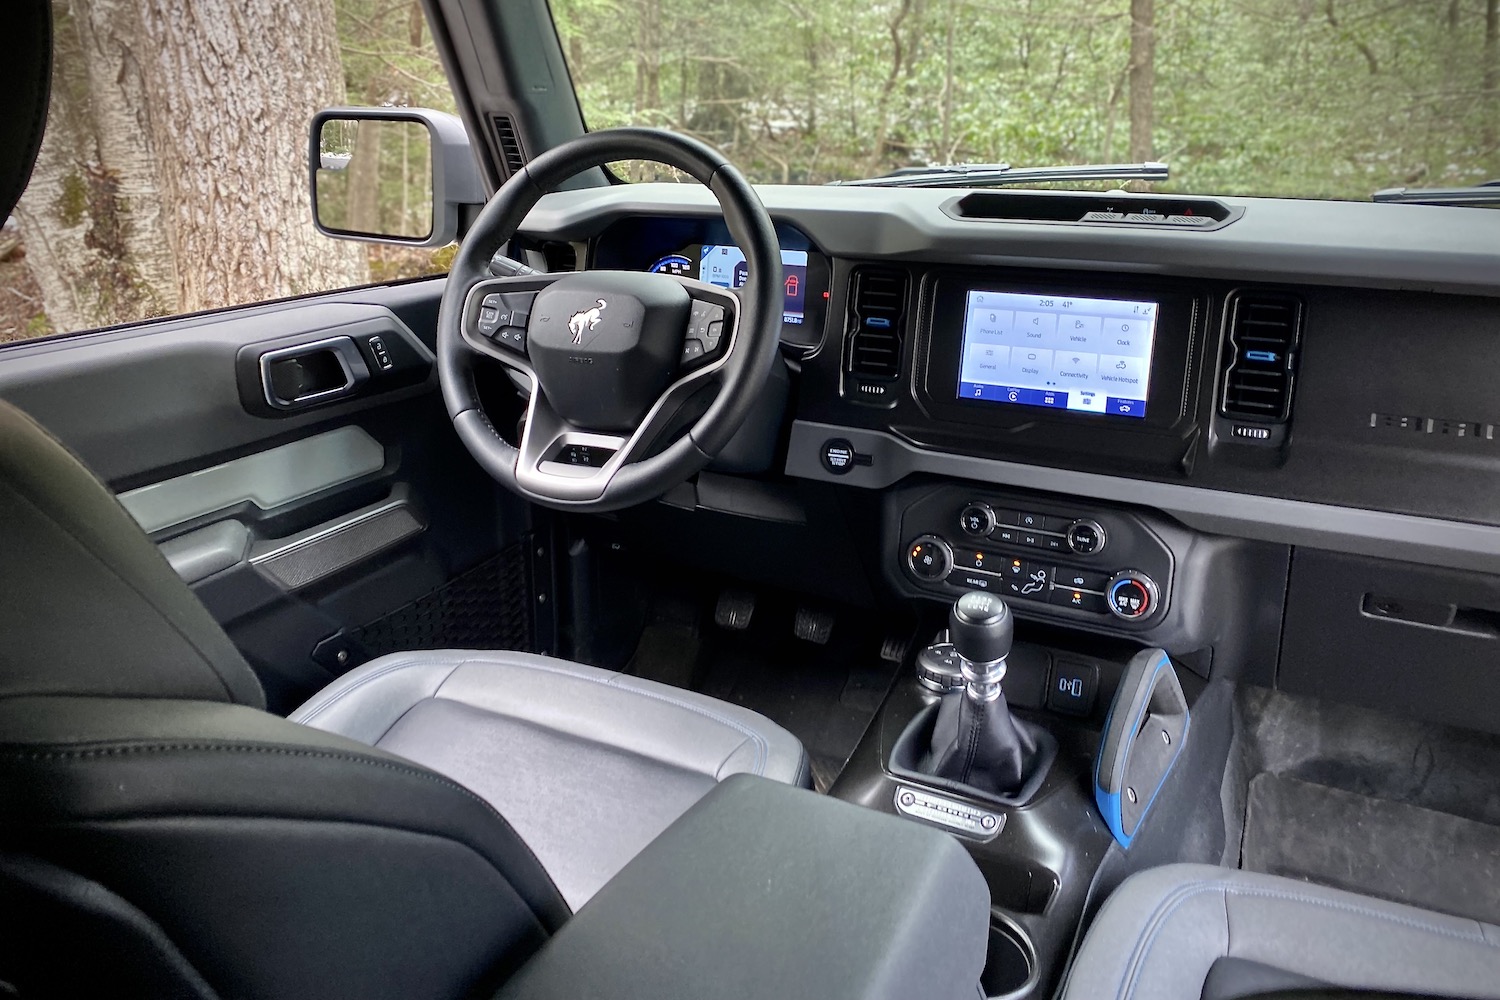 Steering wheel and dashboard in the 2021 Ford Bronco from the back seats with trees in the back.